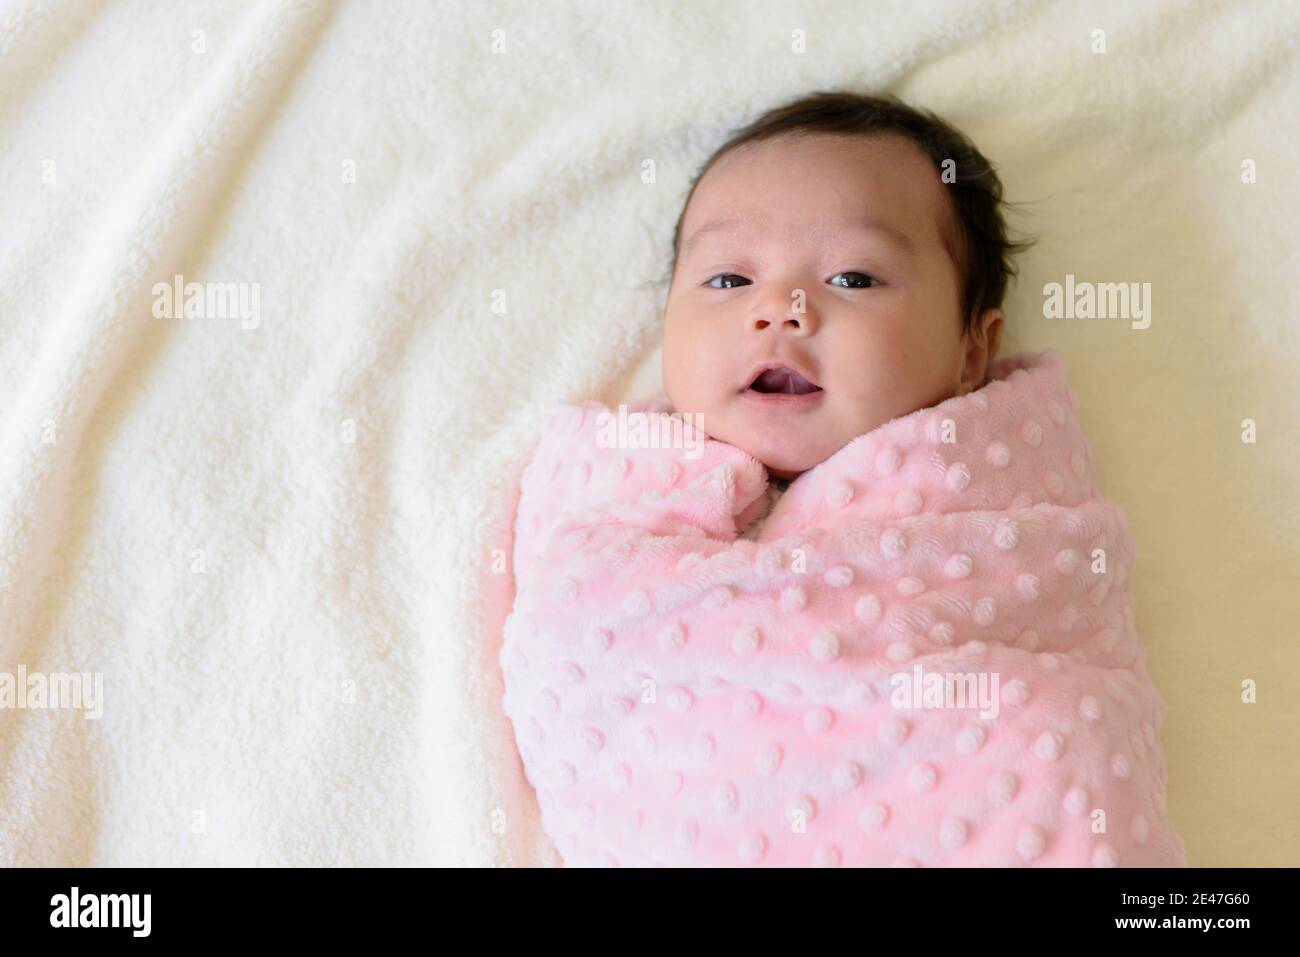 Top view of a cute Asian baby girl wrapped in a pink cloth on the bed Stock Photo